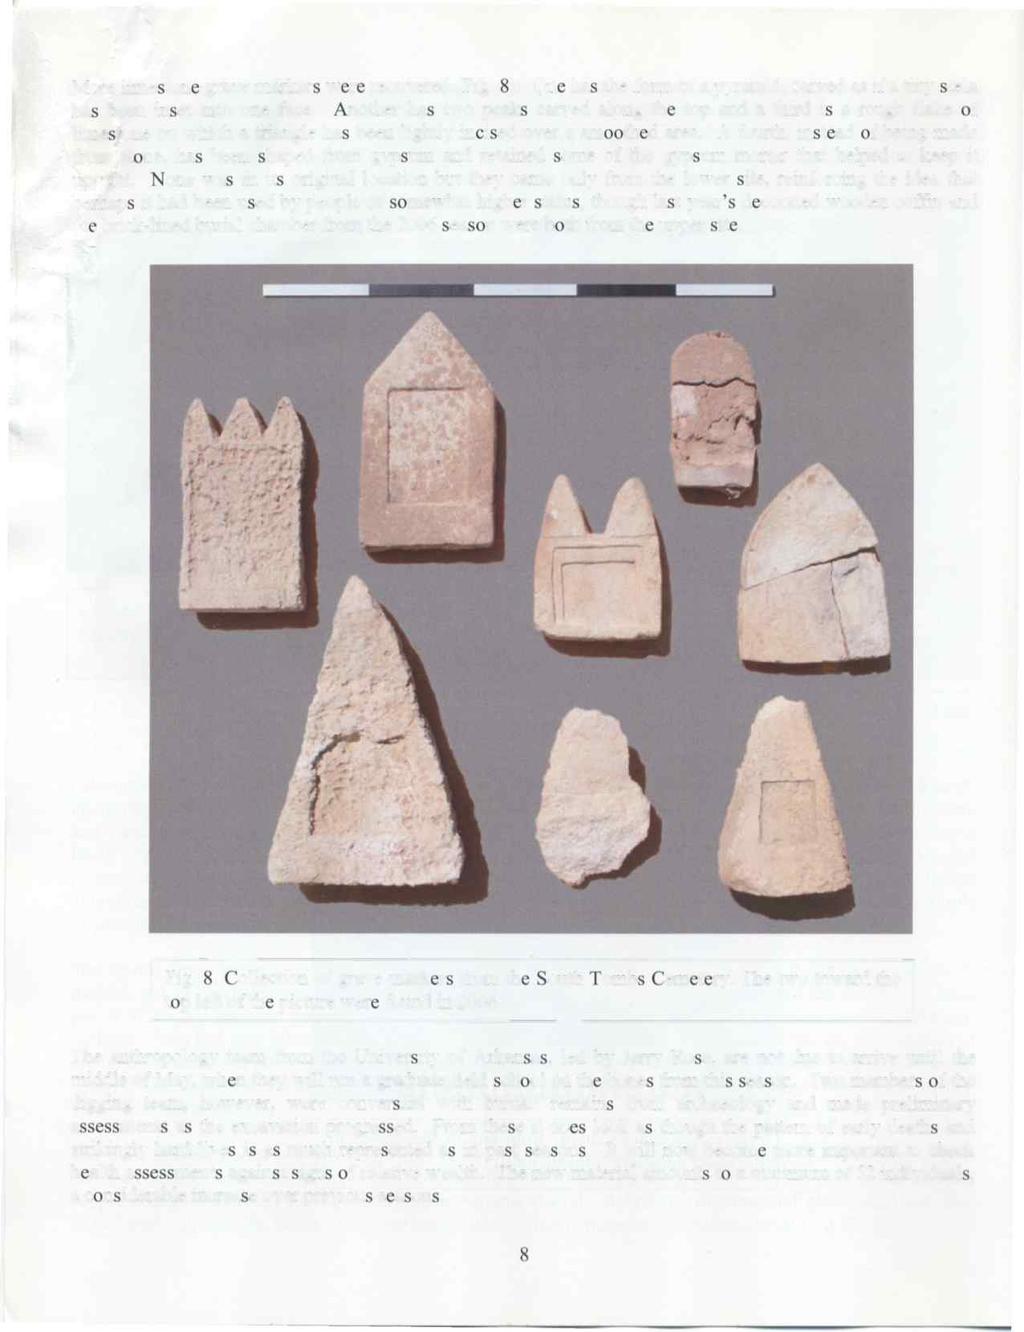 More limestone grave markers were recovered (Fig. 8). One has the form of a pyramid, carved as if a tiny stela has been inset into one face.